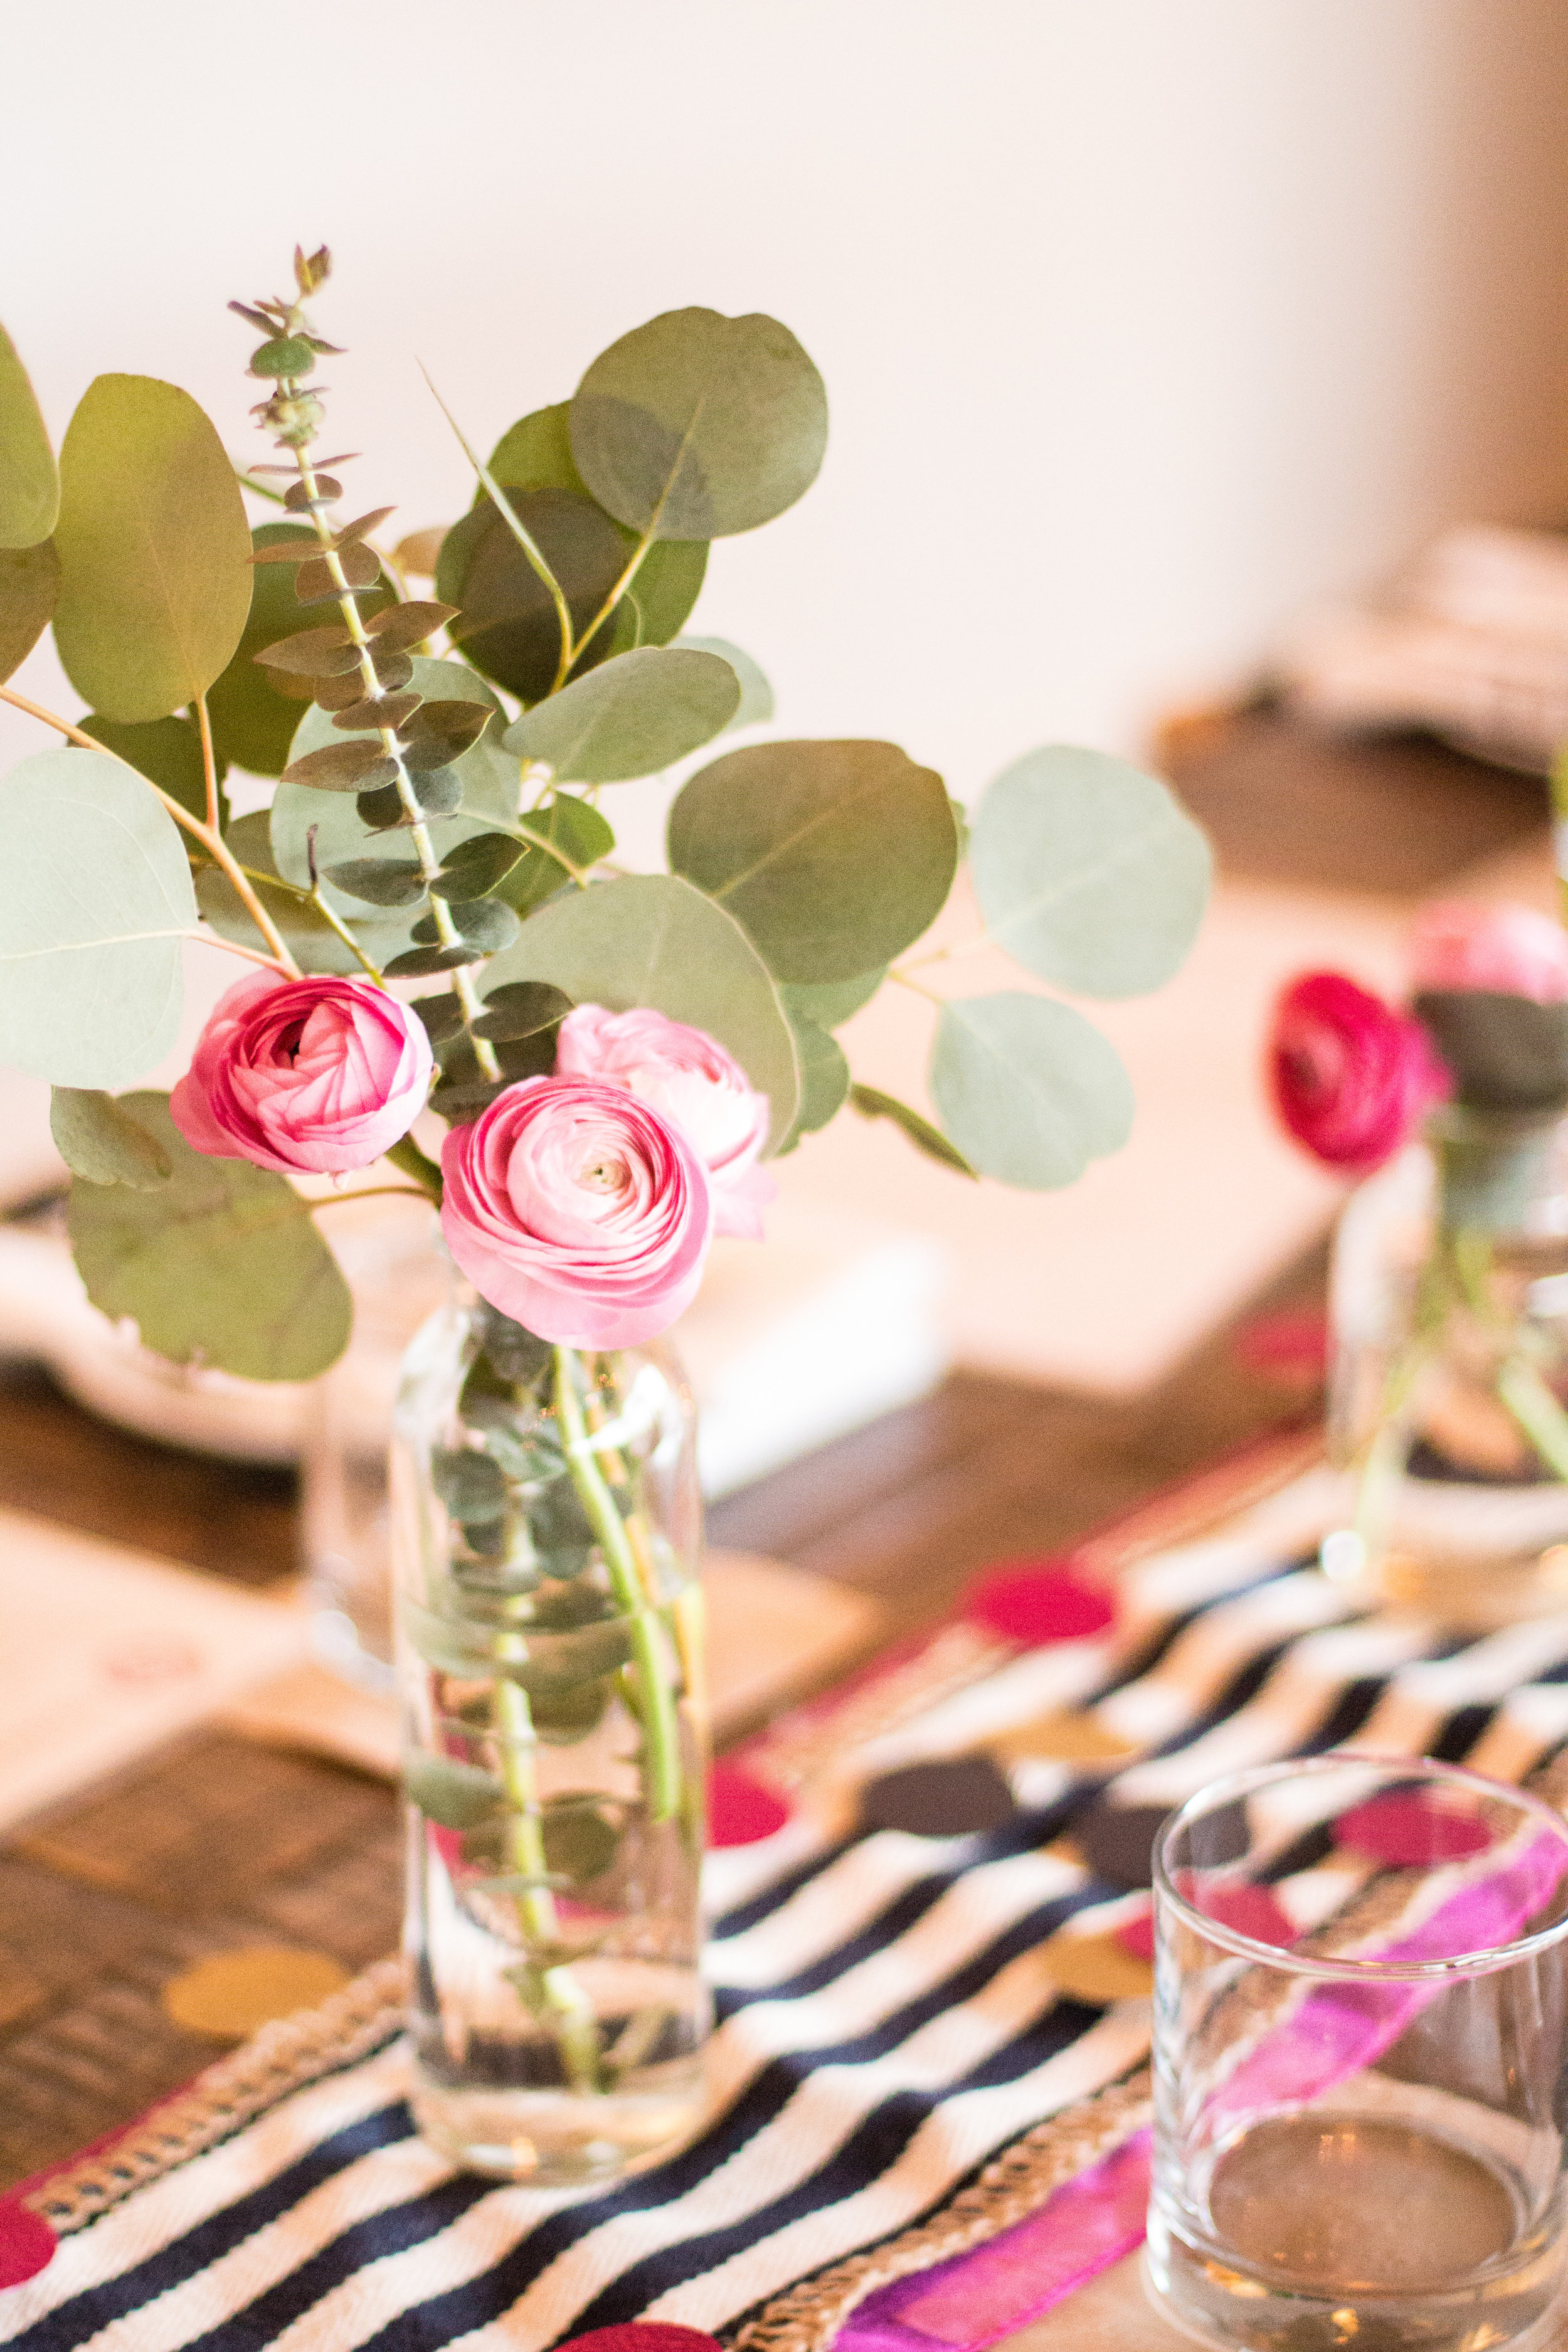 Kate Spade Inspired Surprise Party Sweetwood Creative Co. | Atlanta Wedding  Planner + Upscale Event Design